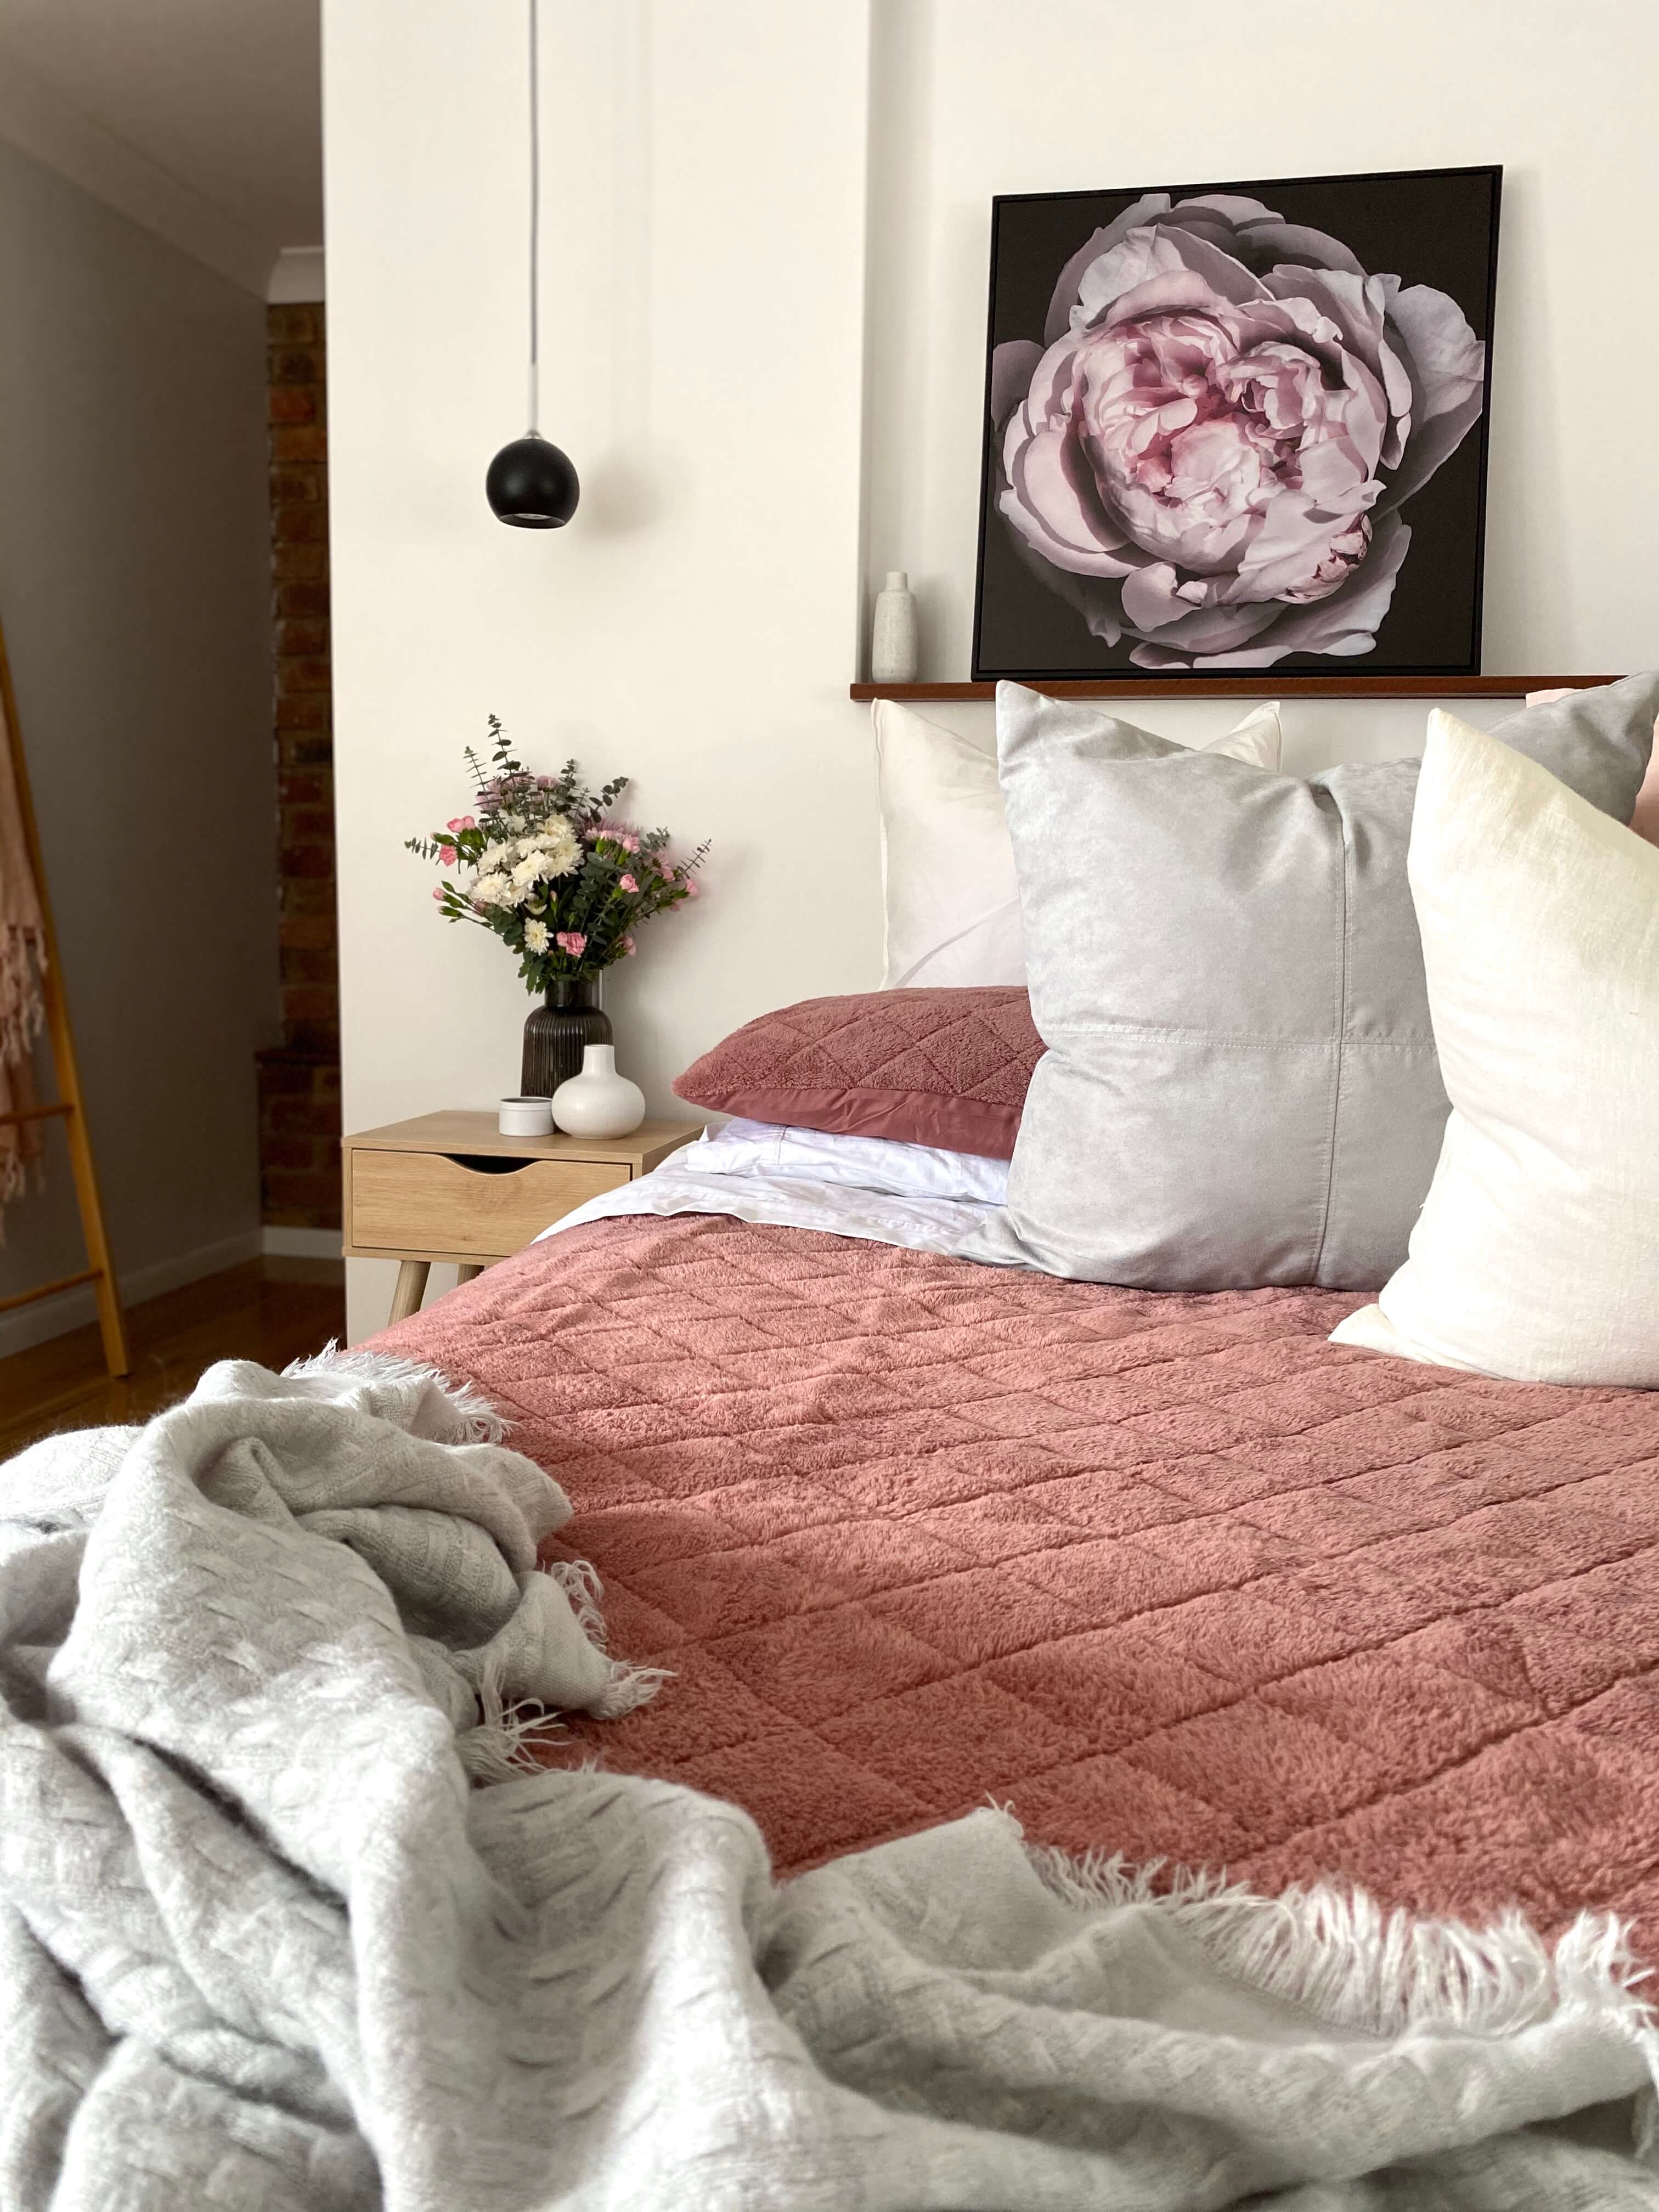 Bedding & Artwork Can Change The Feel Of The Entire Room